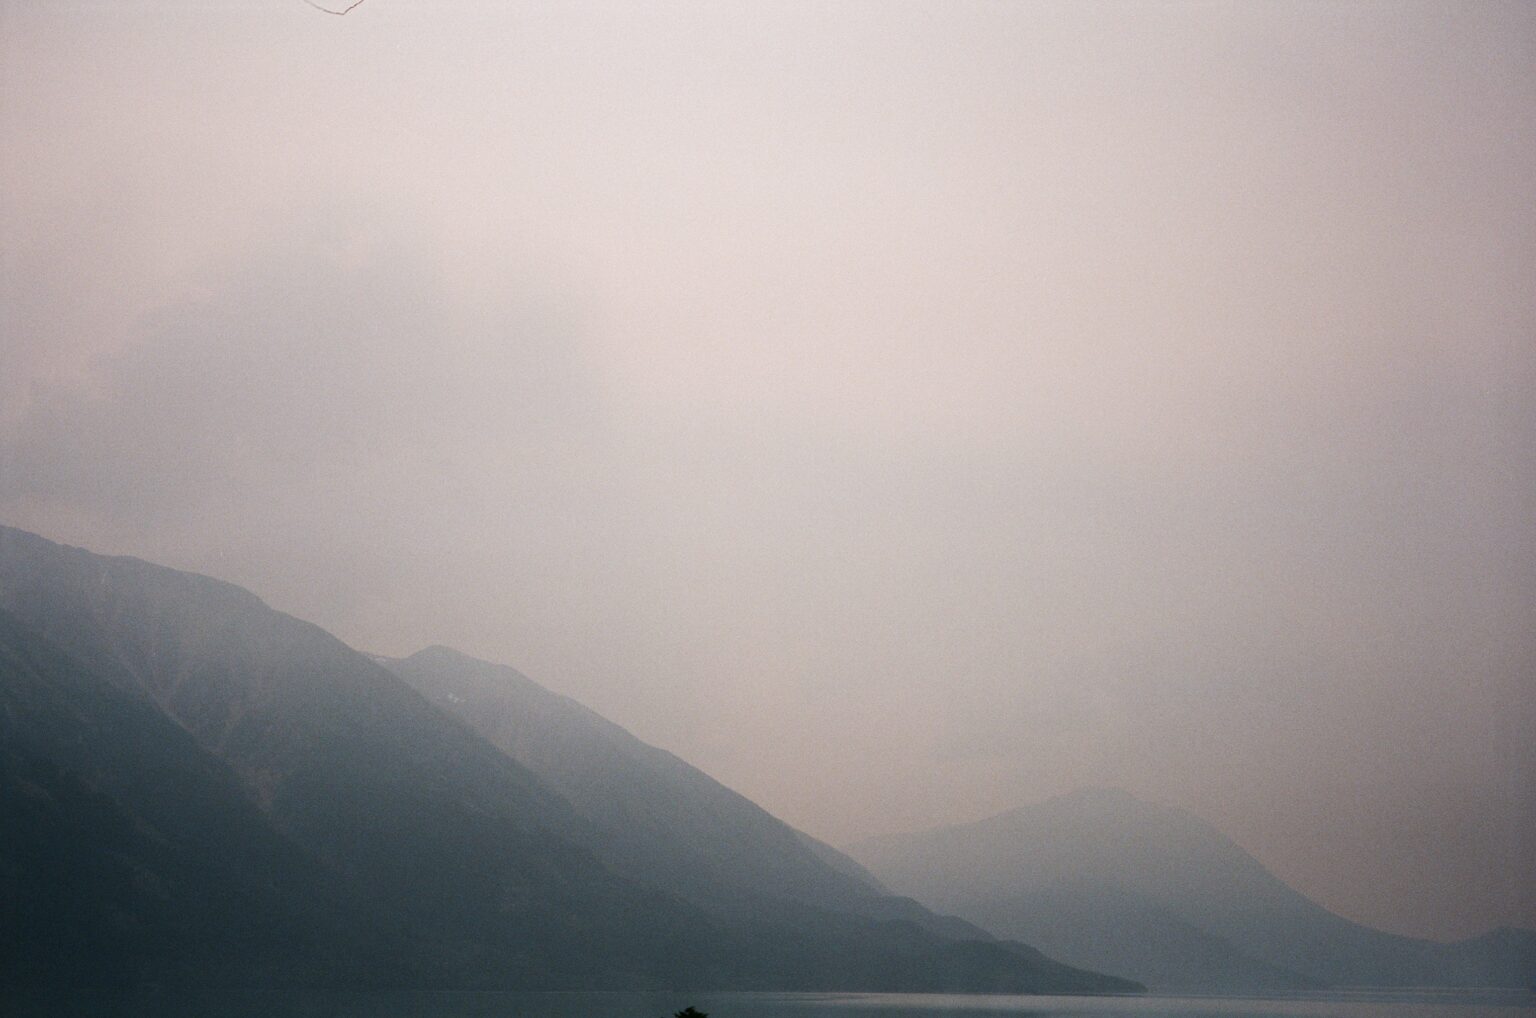 Mountains in fog